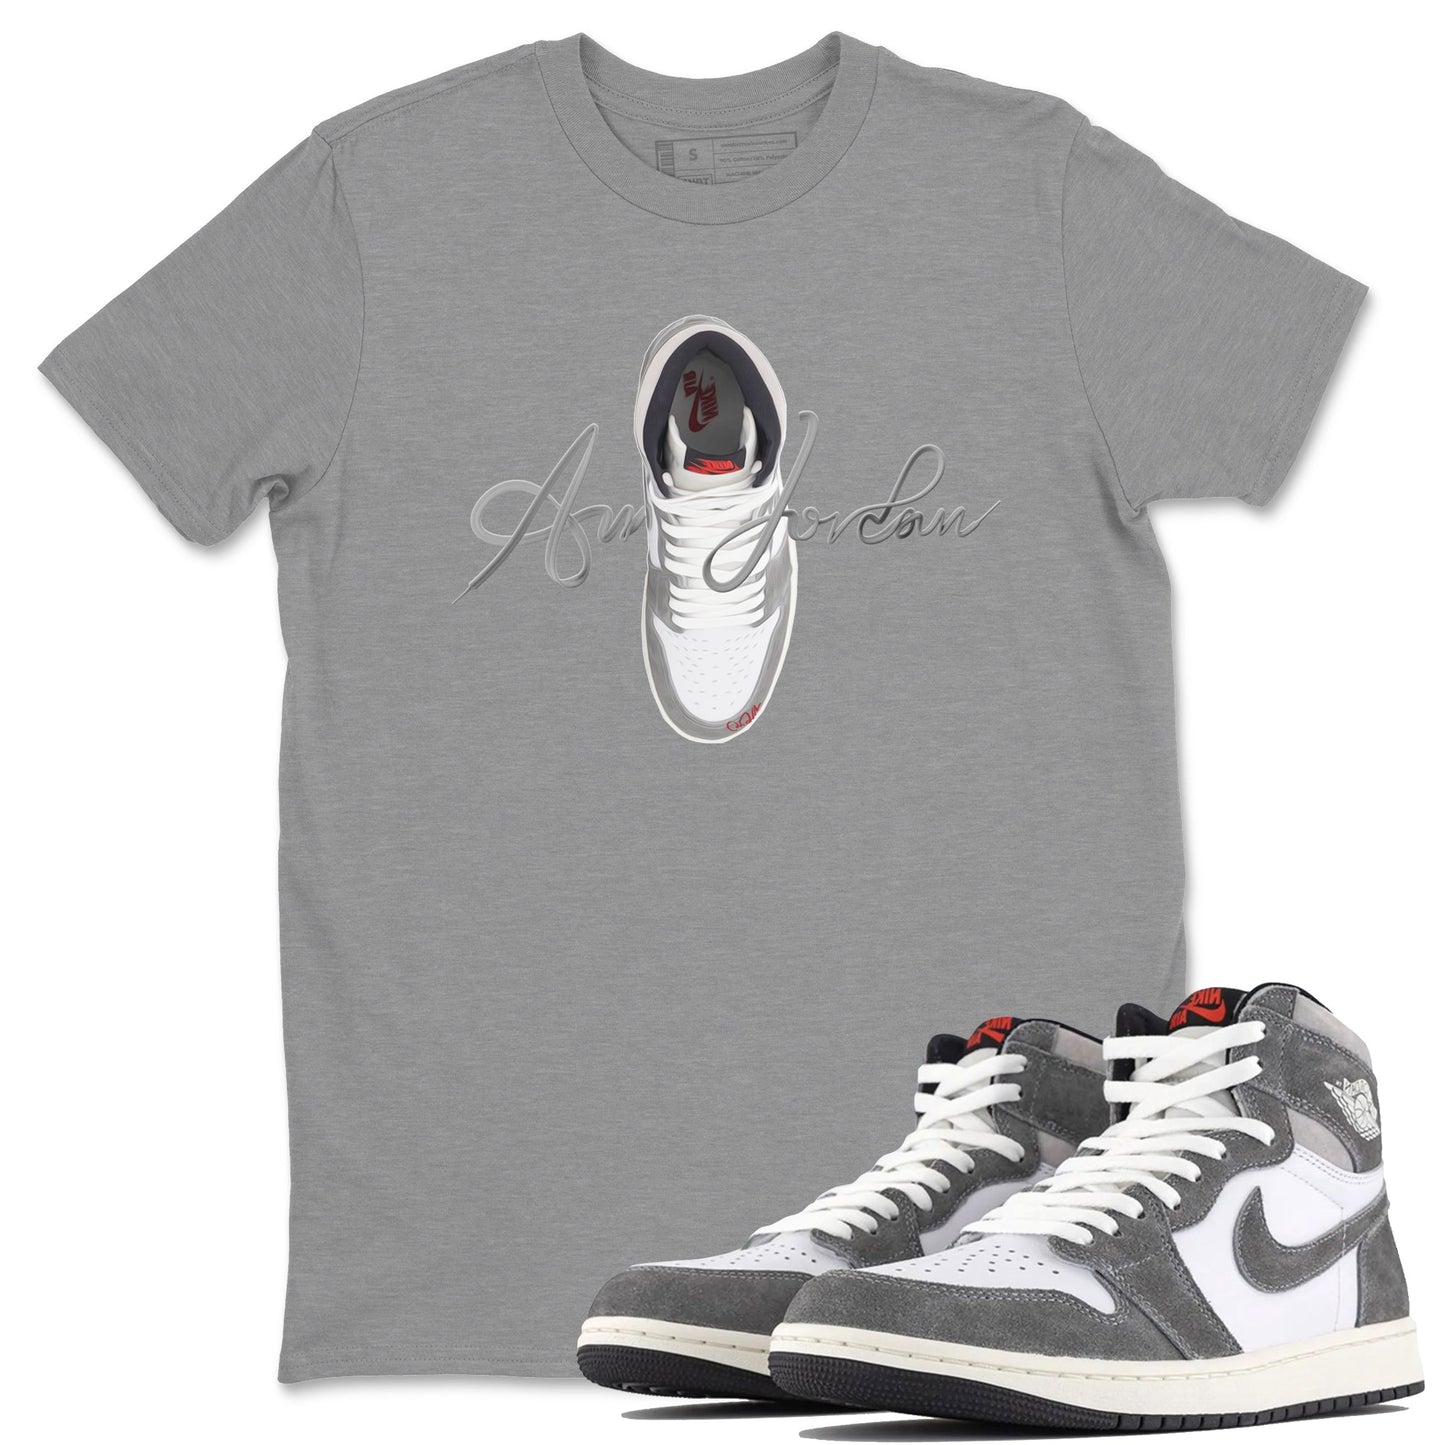 Air Jordan 1 Washed Heritage Sneaker Match Tees Caligraphy Shoe Lace Shirts AJ1 Washed Heritage Drip Gear Zone Unisex Shirts Heather Grey 1